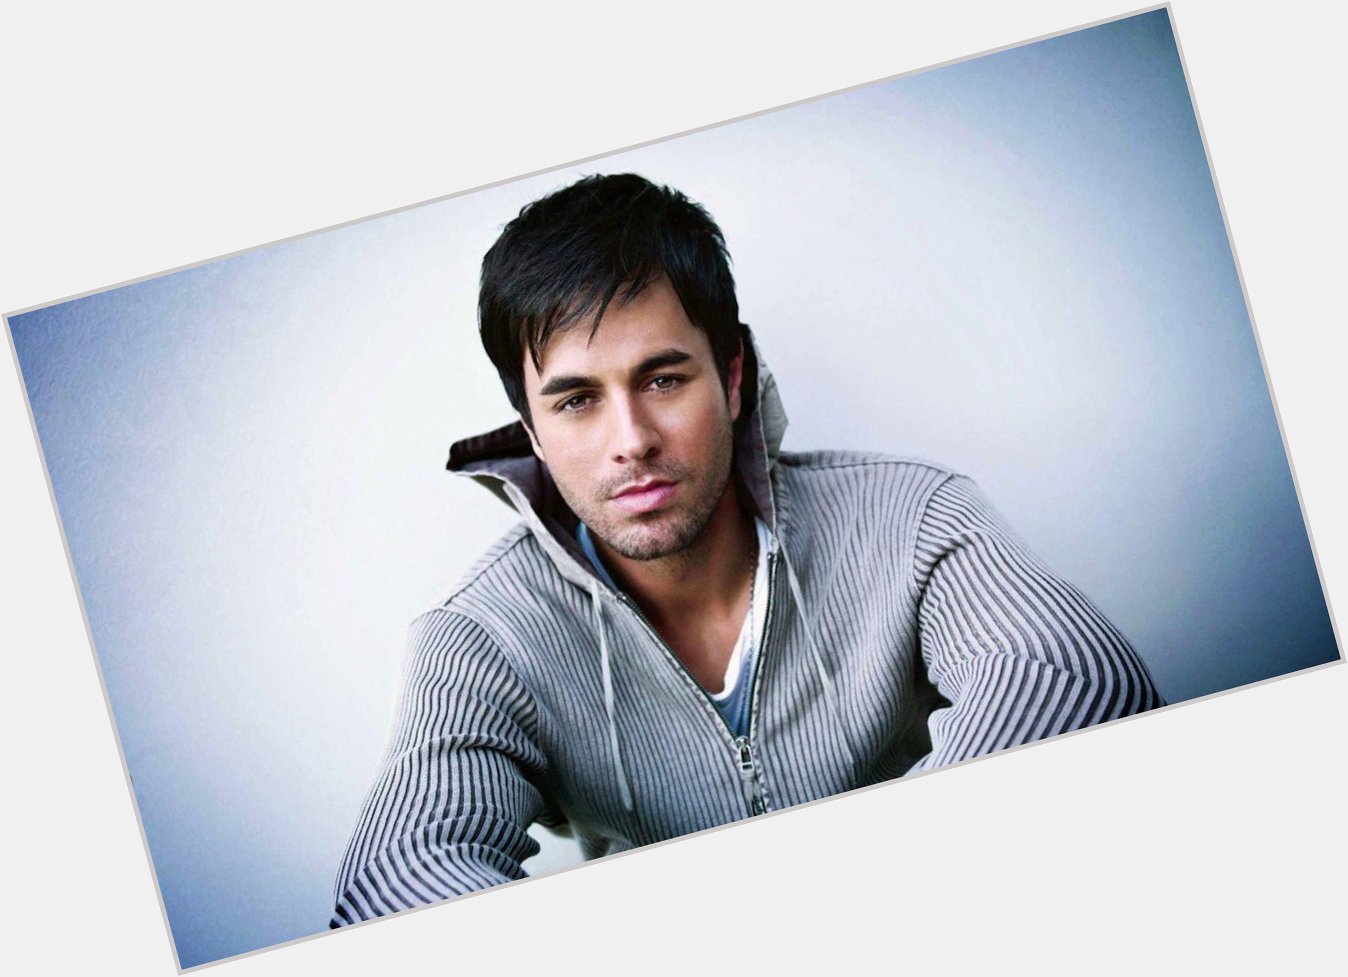 Even though he doesn\t seem to age, Happy 42nd Birthday to Enrique Iglesias!
He\s touring with Pitbull this summer! 